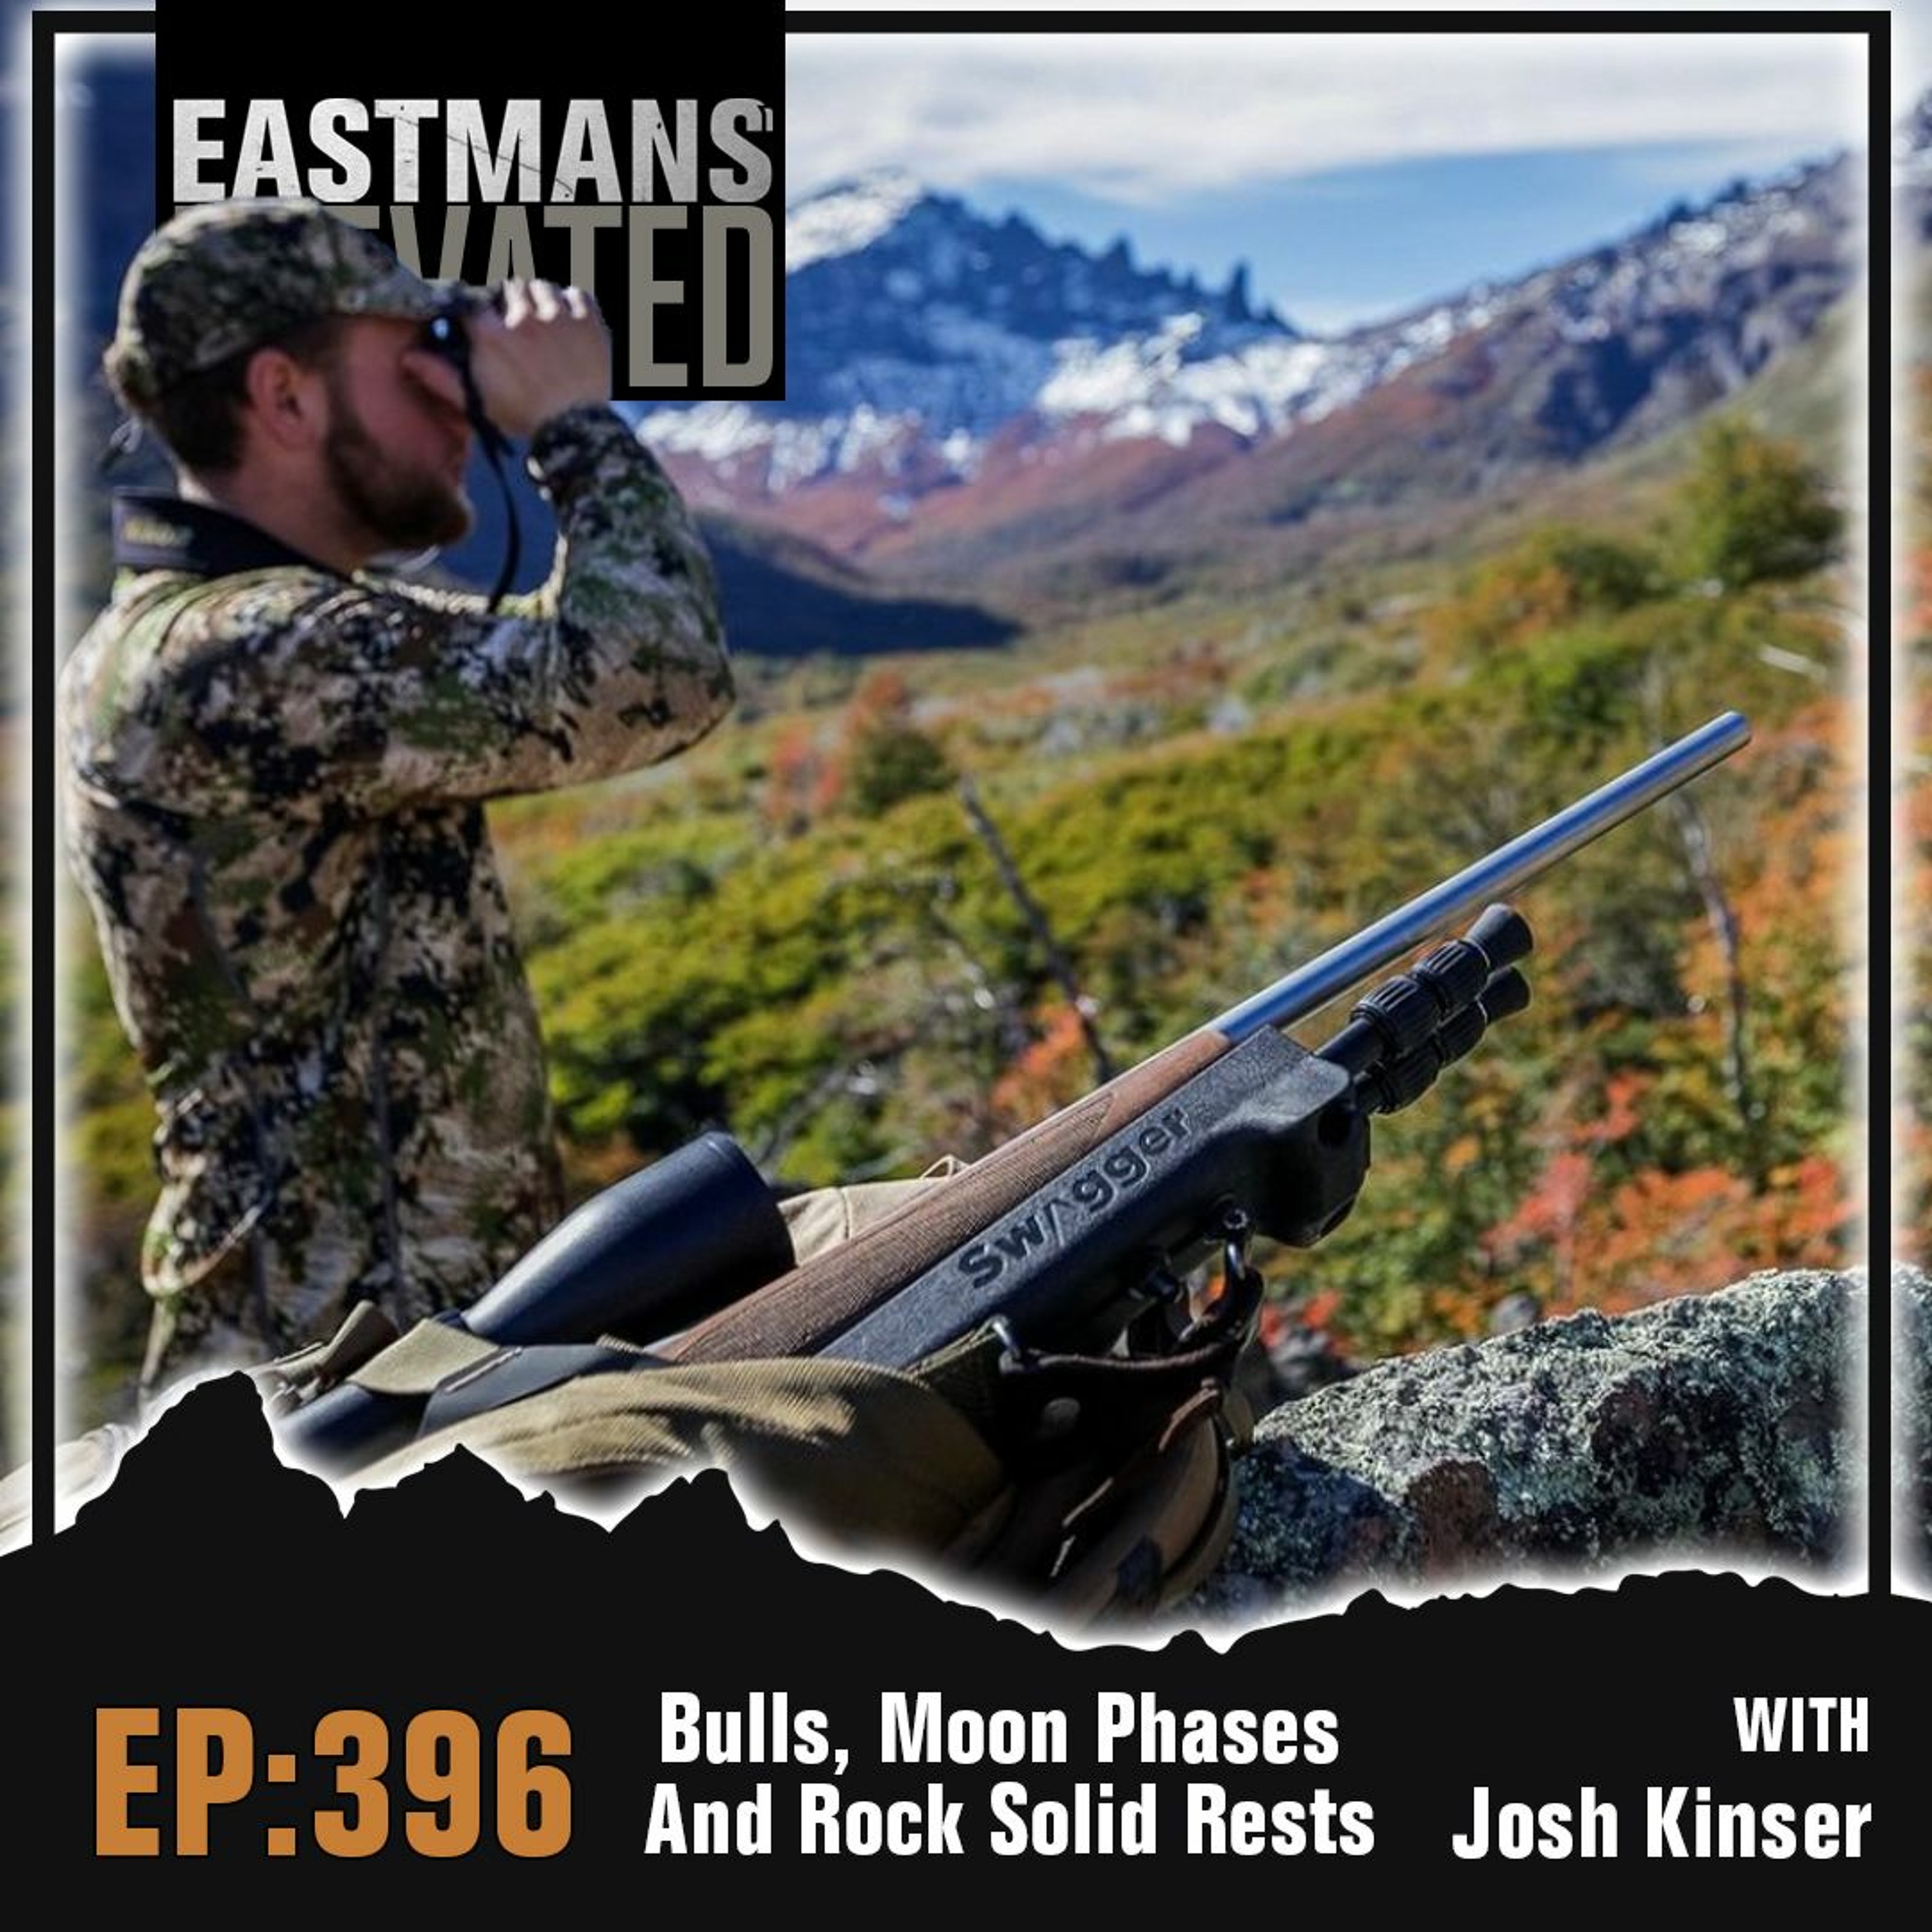 Episode 396:  Bulls, Moon Phases And Rock Solid Rests With Josh Kinser